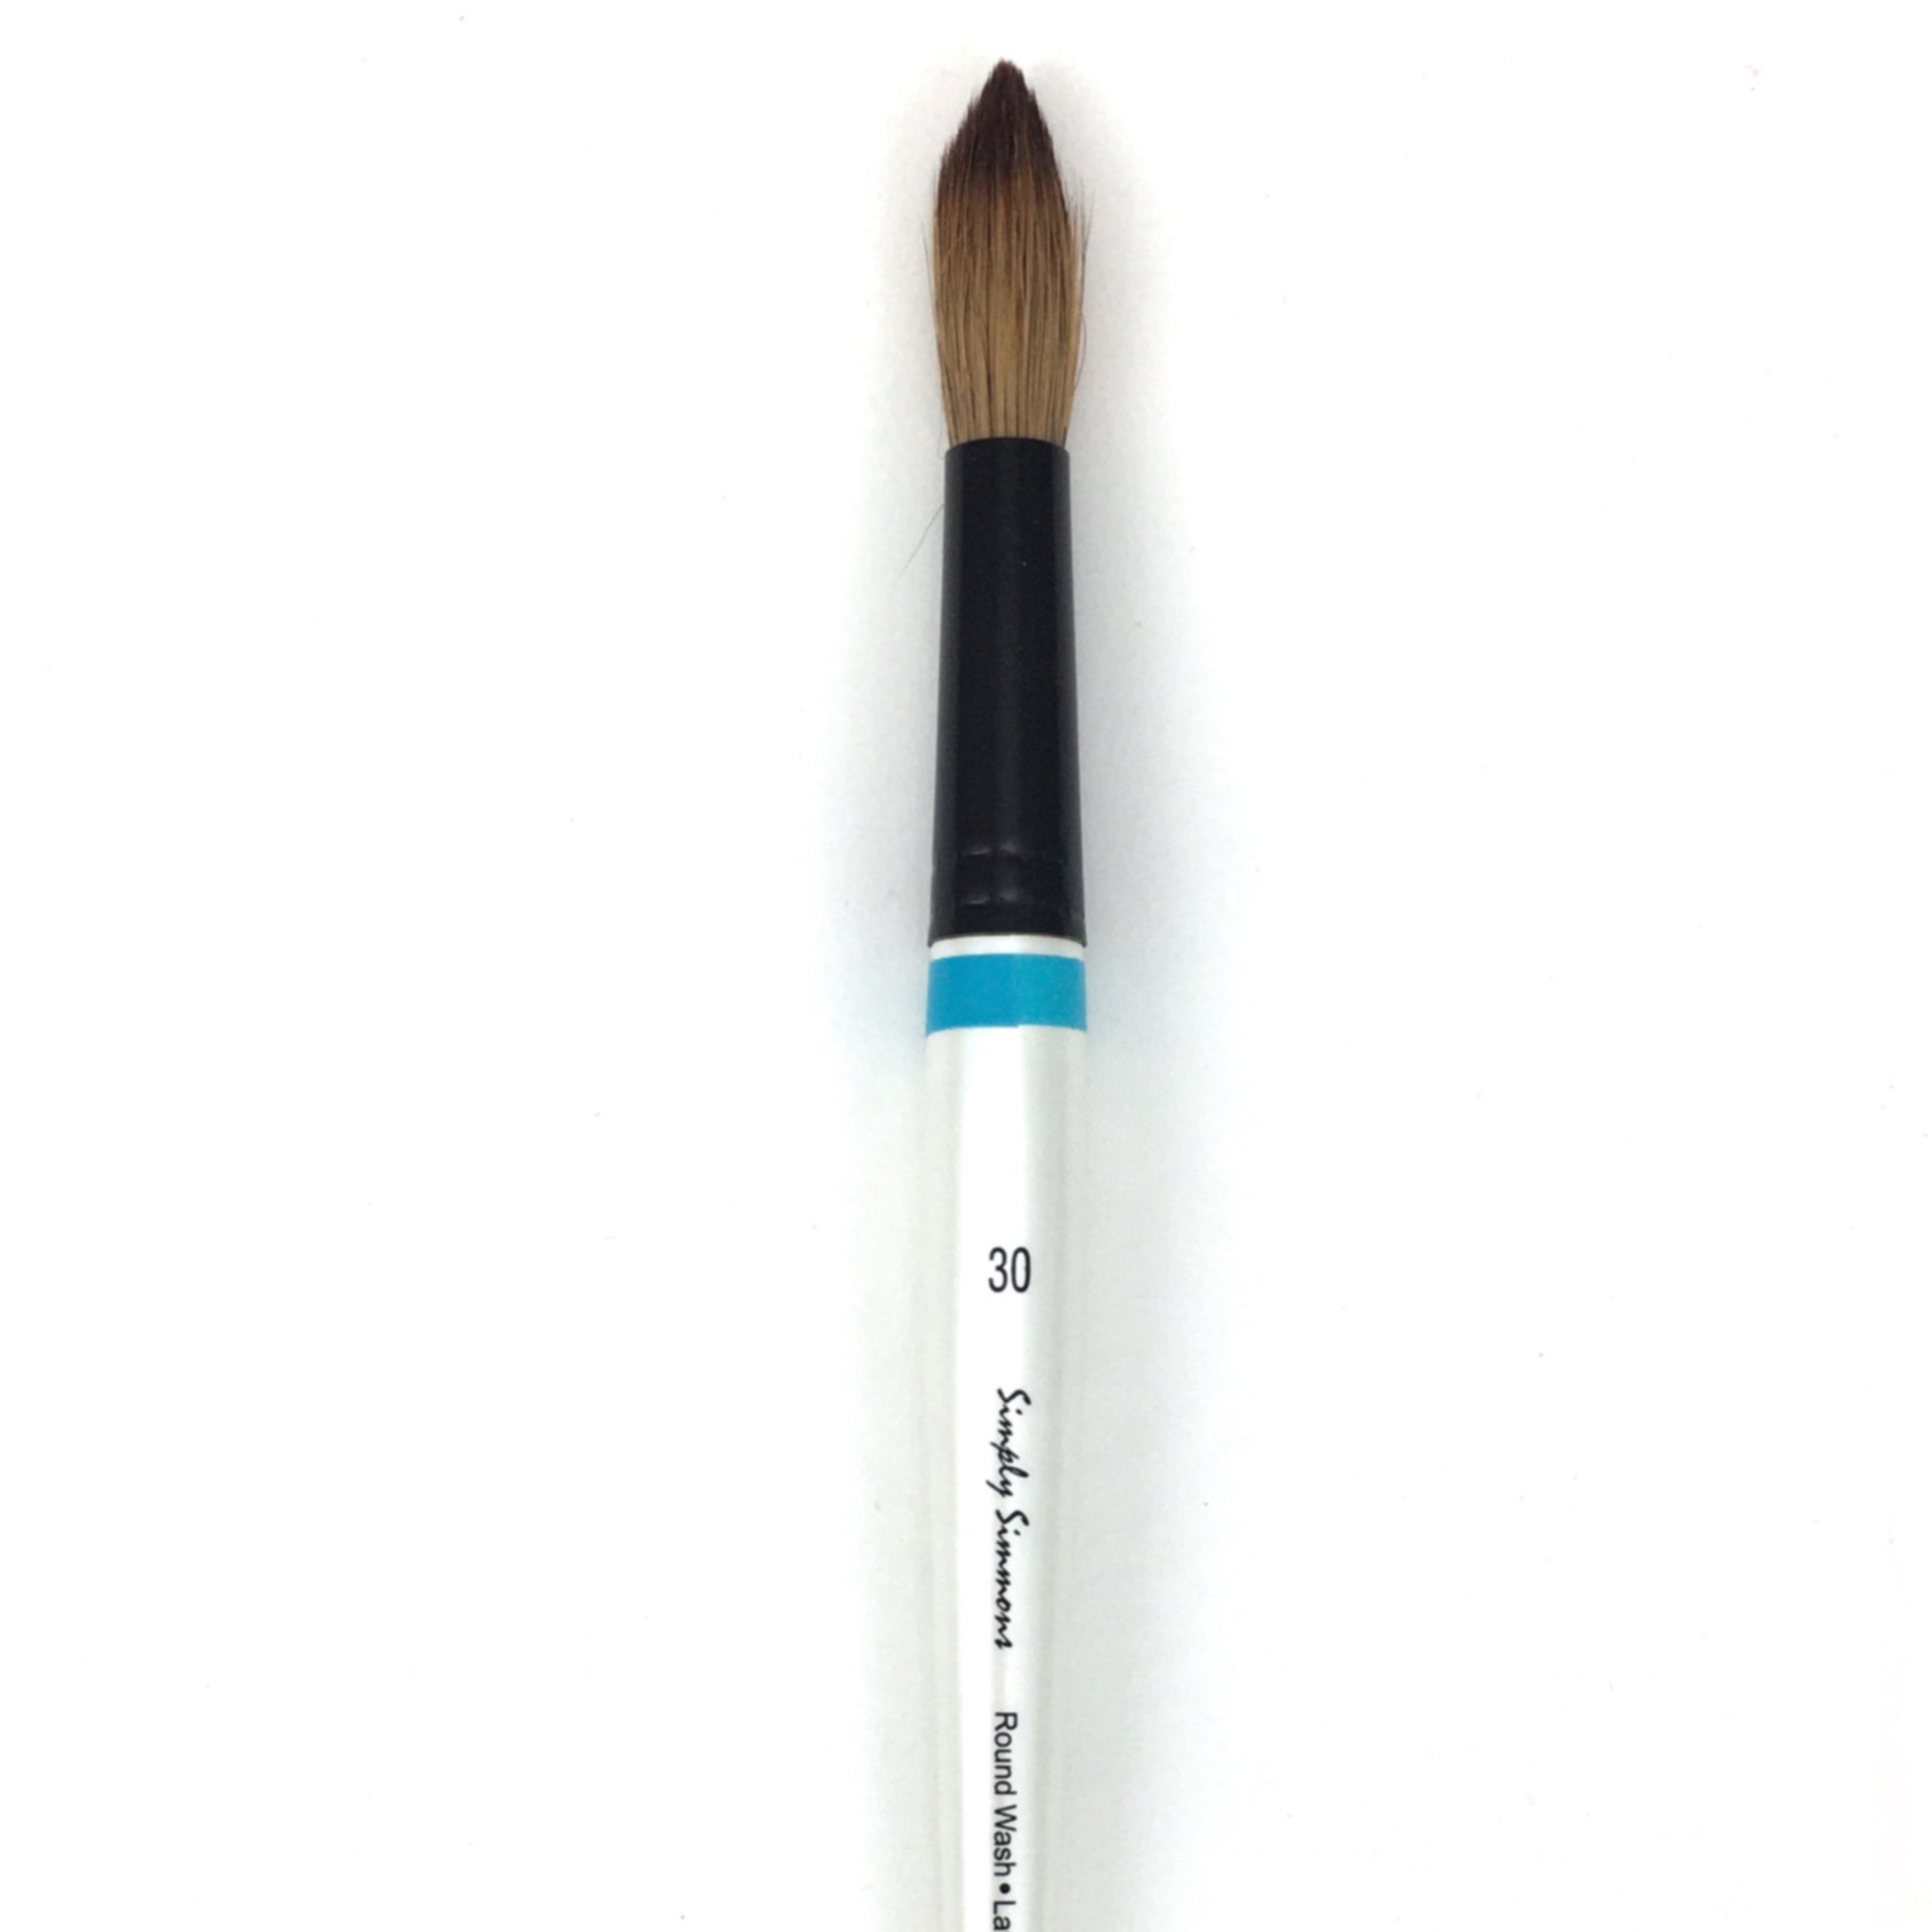 Simply Simmons Watercolor Brush - Short Handle - Round Wash / - #30 / - natural by Robert Simmons - K. A. Artist Shop